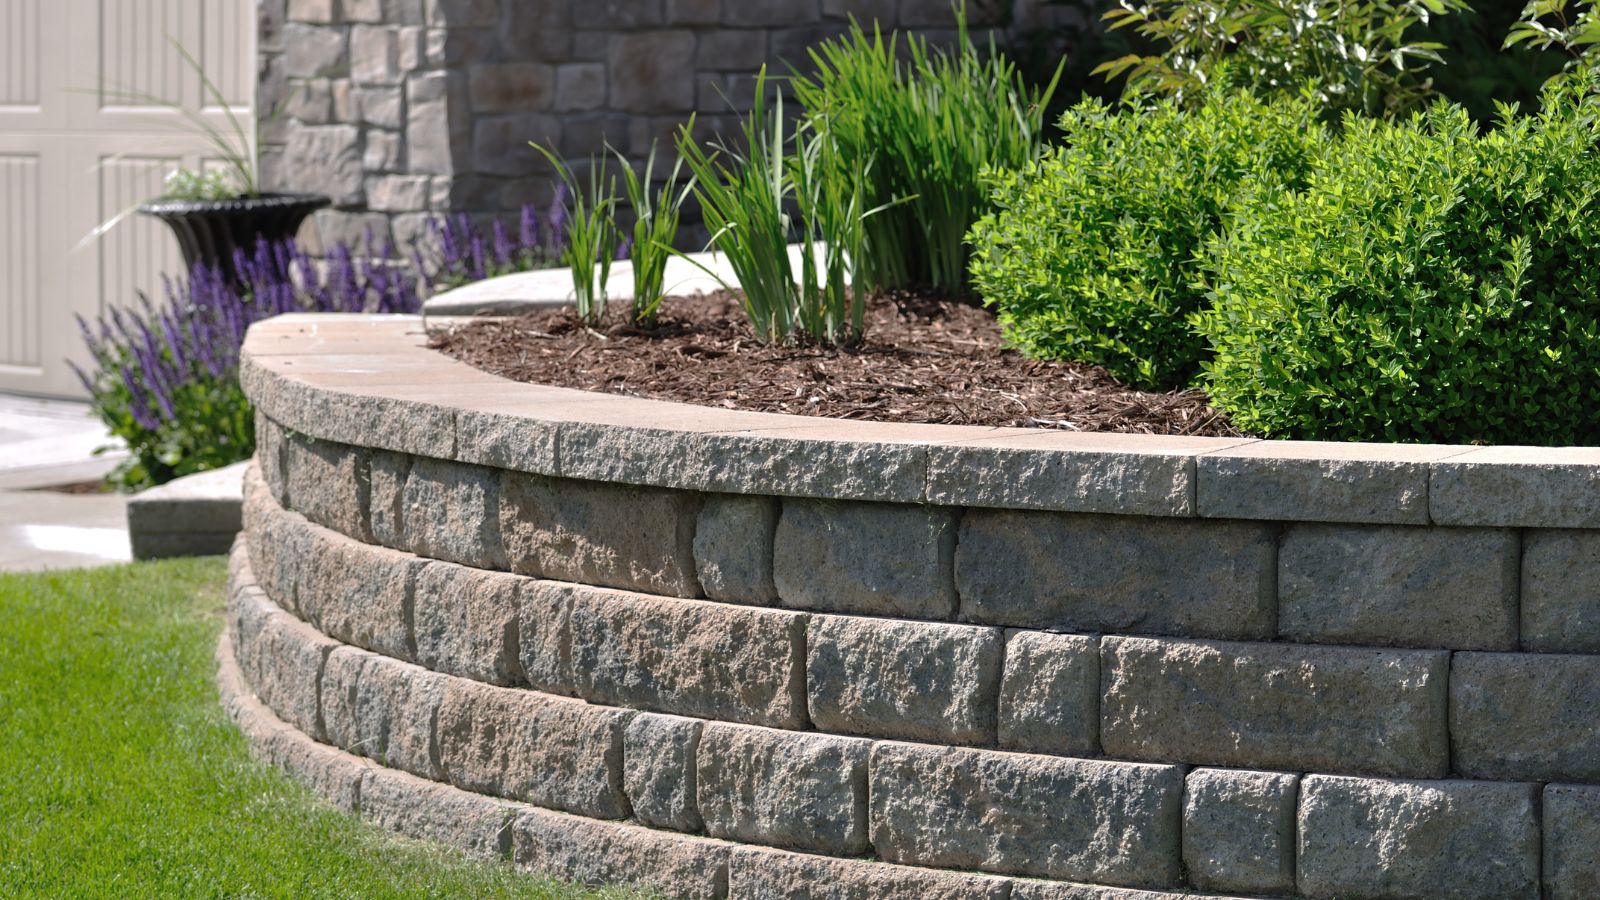 Choosing the Right Retaining Wall Material for Your Project
